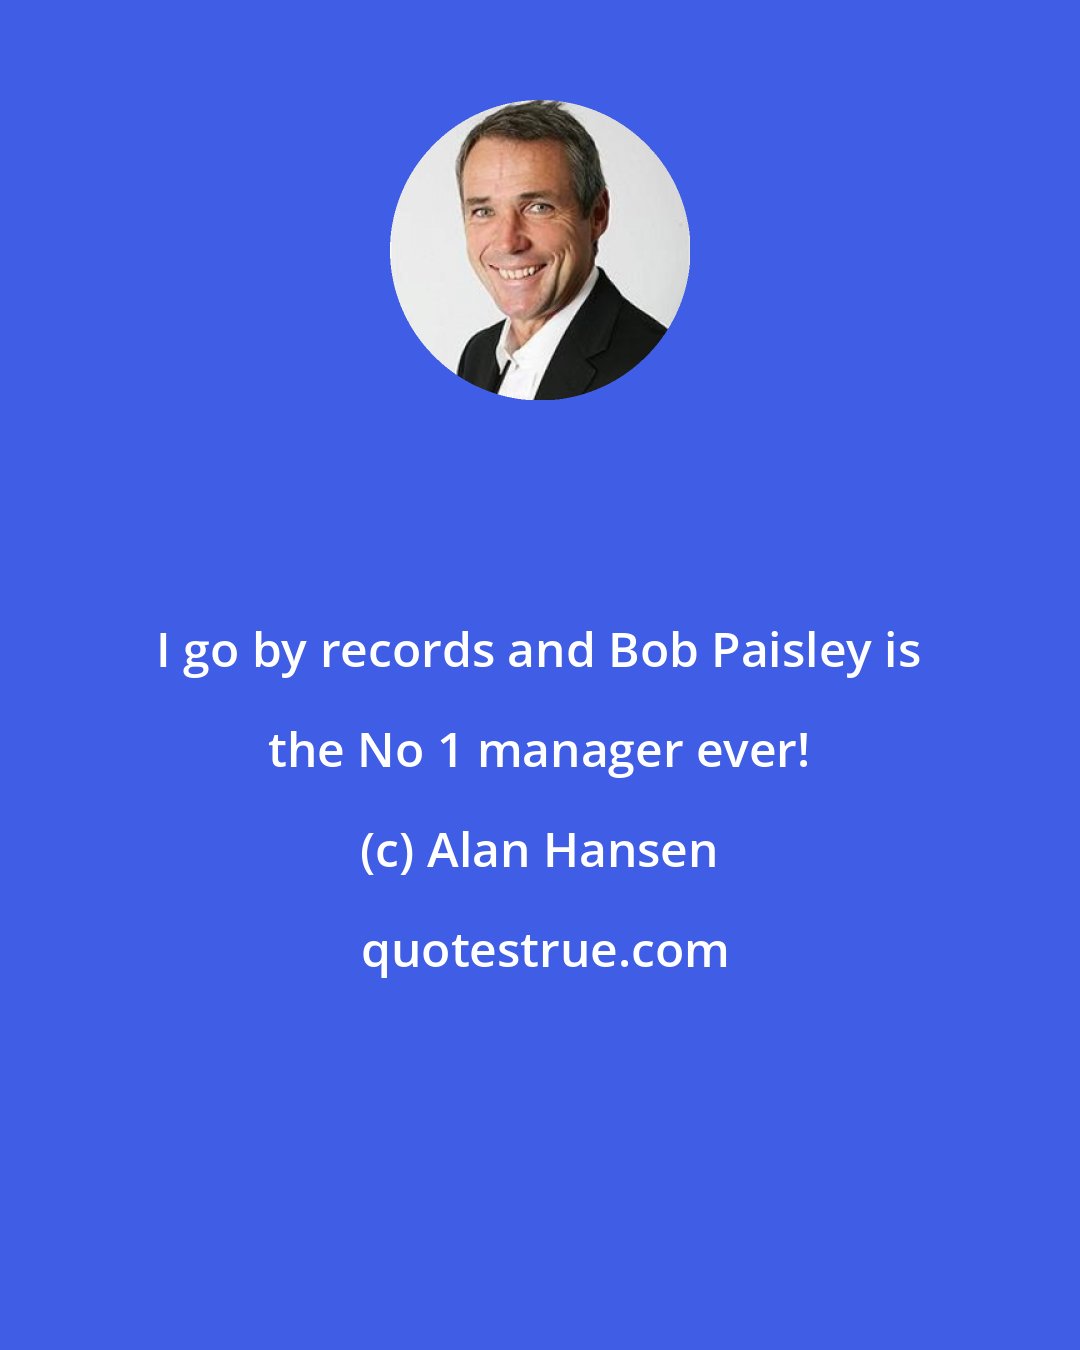 Alan Hansen: I go by records and Bob Paisley is the No 1 manager ever!